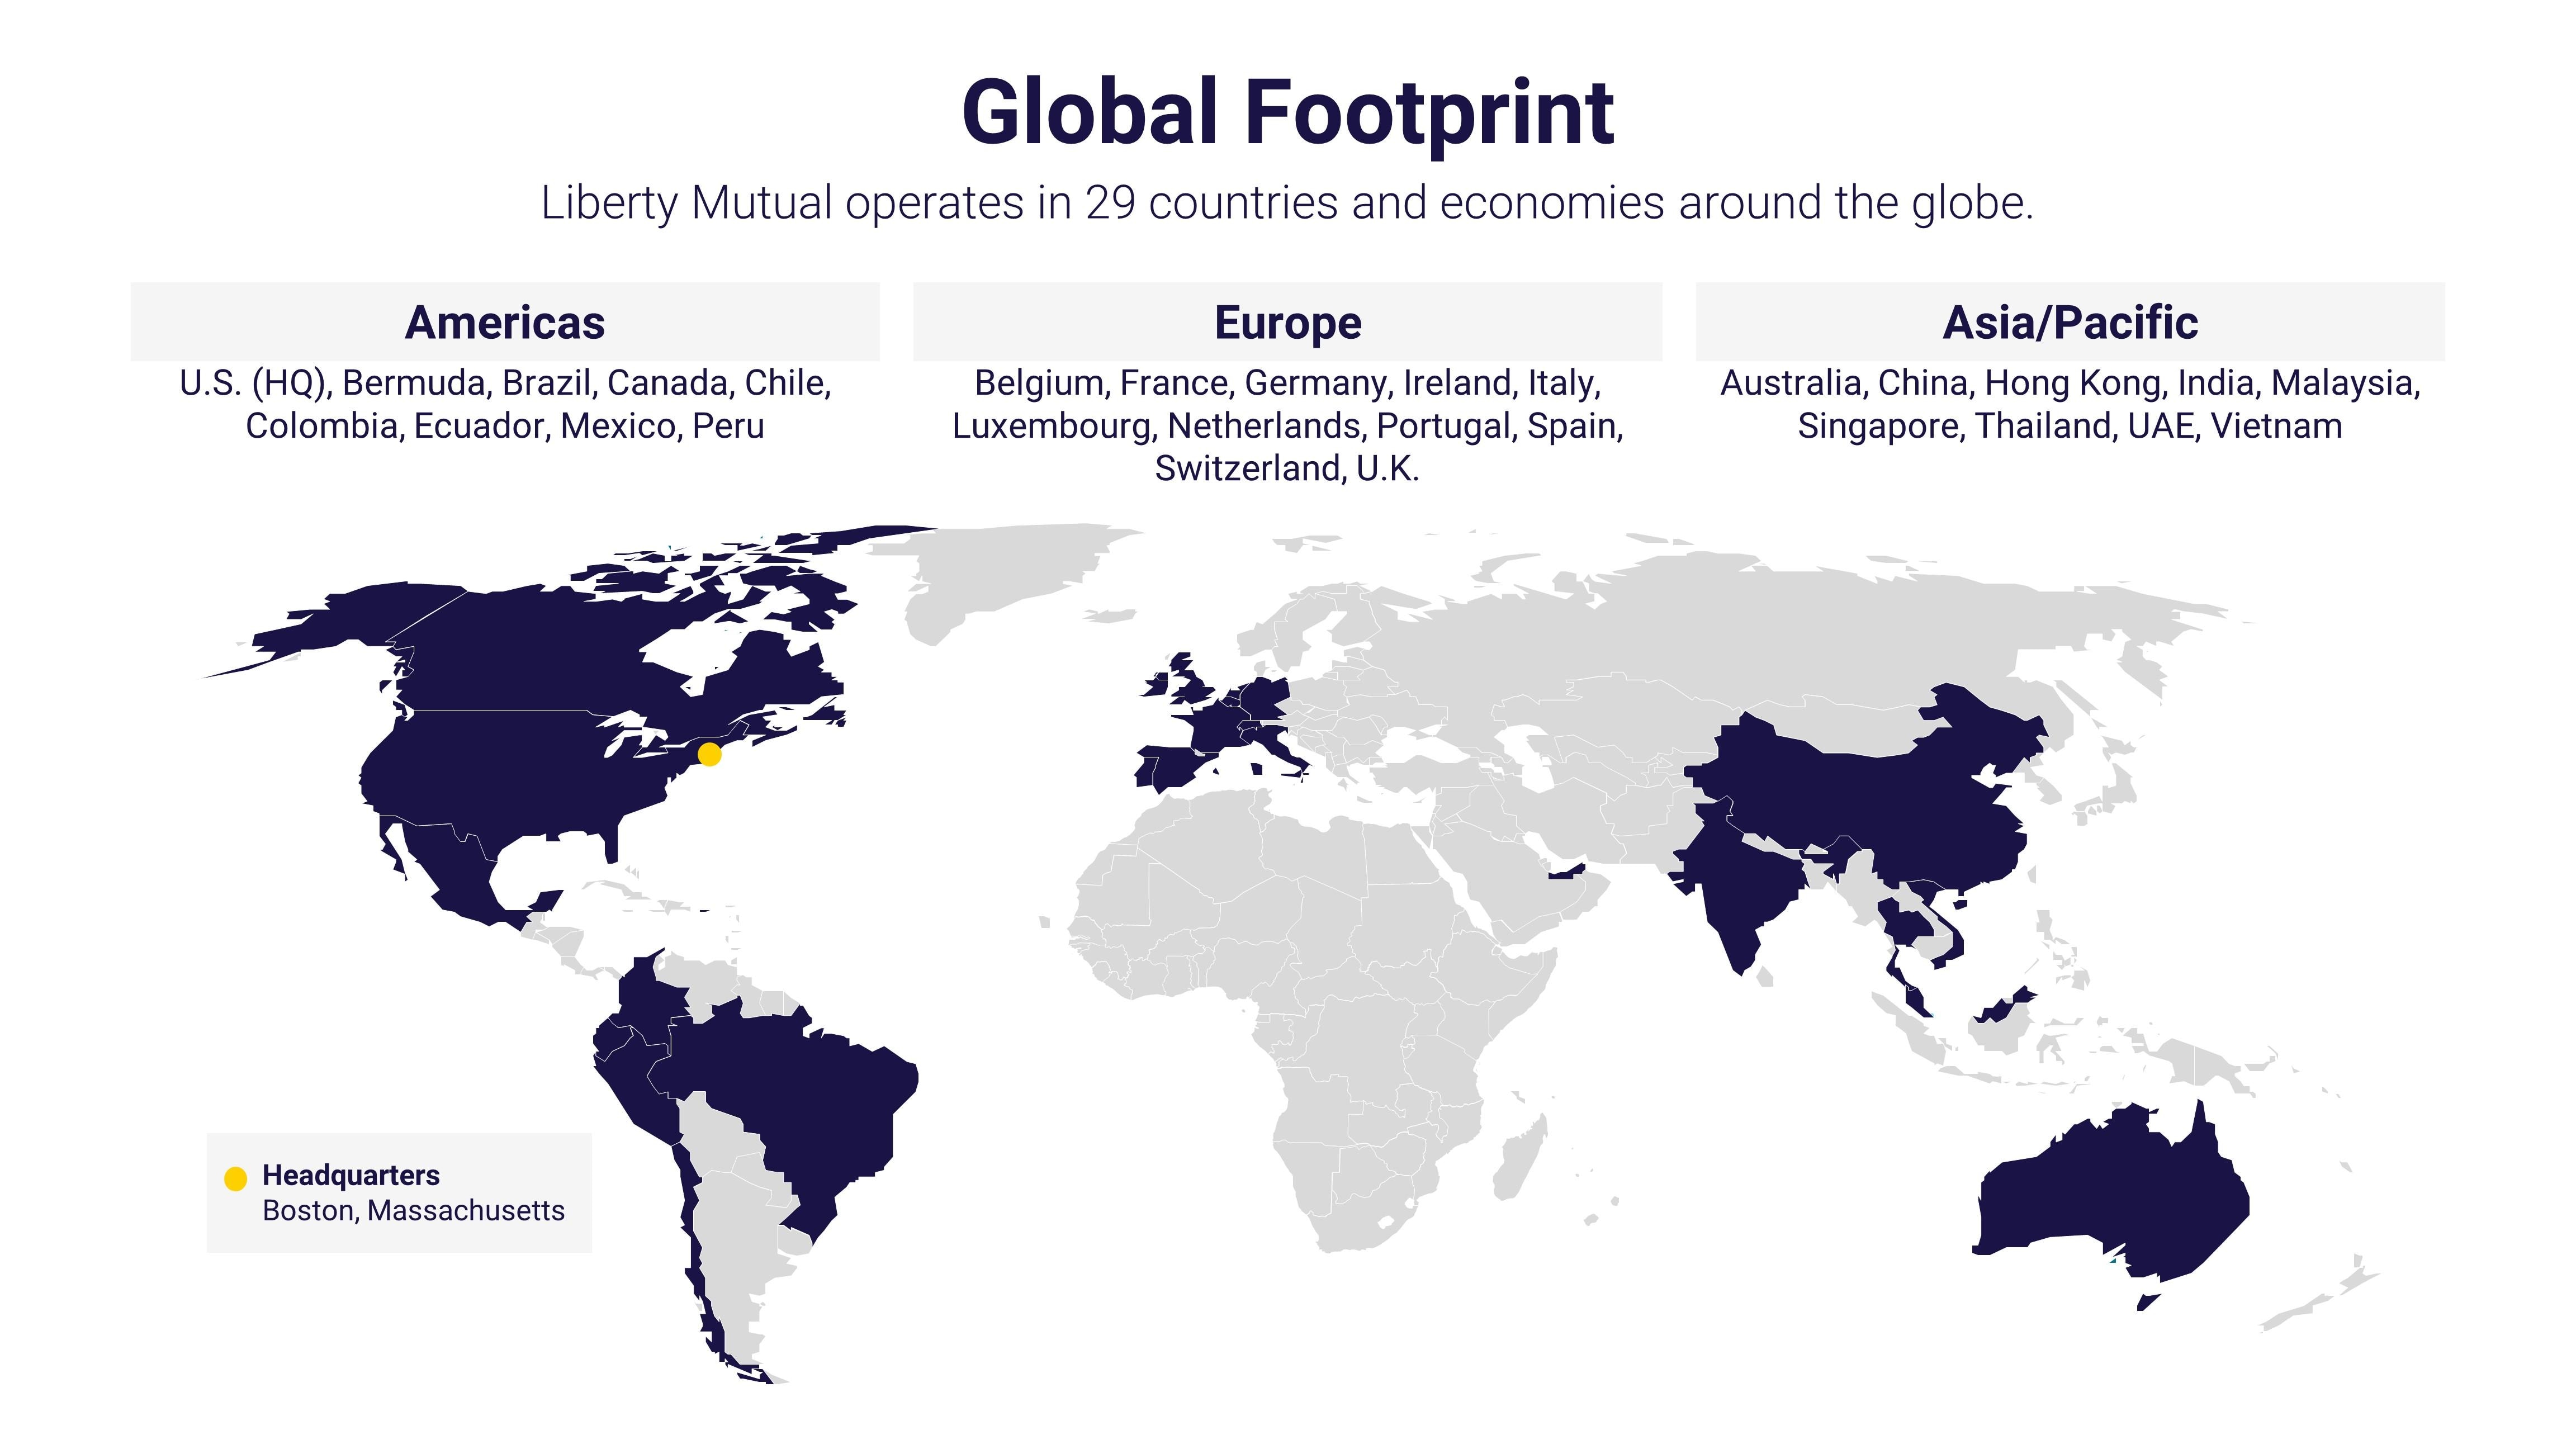 (slide 1 of 3) A map showing Liberty Mutual's global footprint. Liberty Mutual operates in 29 countries and economies around the globe. Those countries include U.S. (headquarters Boston, MA), Bermuda, Brazil, Canada, Chile, Colombia, Ecuador, Mexico, Peru in the Americas; Belgium, France, Germany, Ireland, Italy, Luxembourg, Netherlands, Portugal, Spain, Switzerland, U.K. in Europe; and Australia, China, Hong Kong, India, Malaysia, Singapore, Thailand, UAE, Vietnam in Asia/Pacific.. 